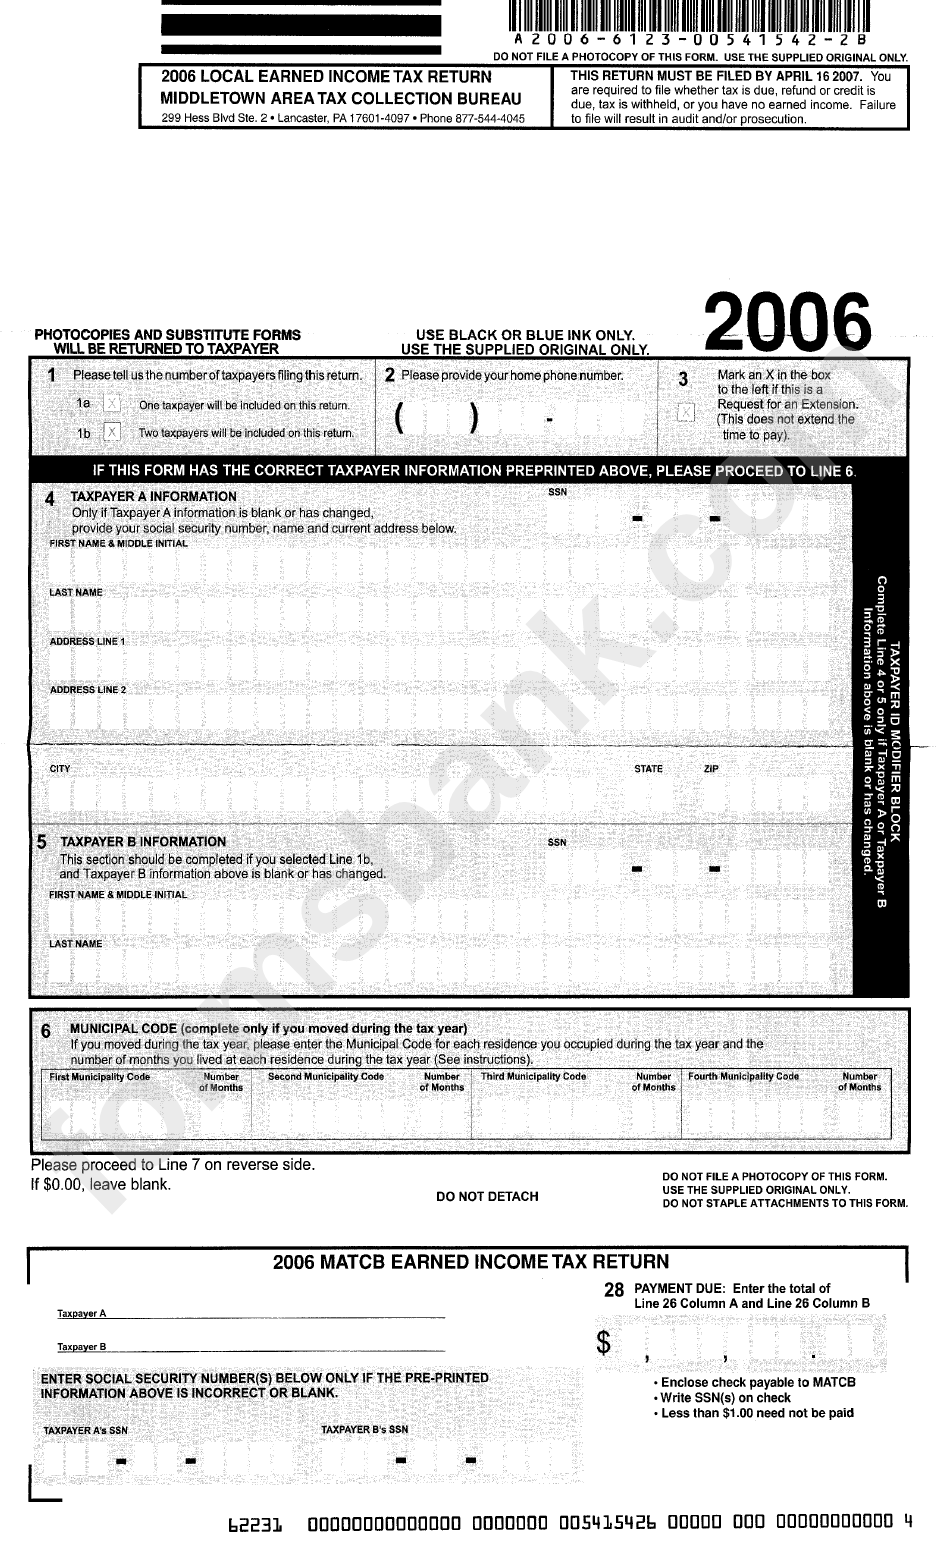 Local Earned Income Tax Return Form 2006 - Middletown Area Tax Collection Bureau